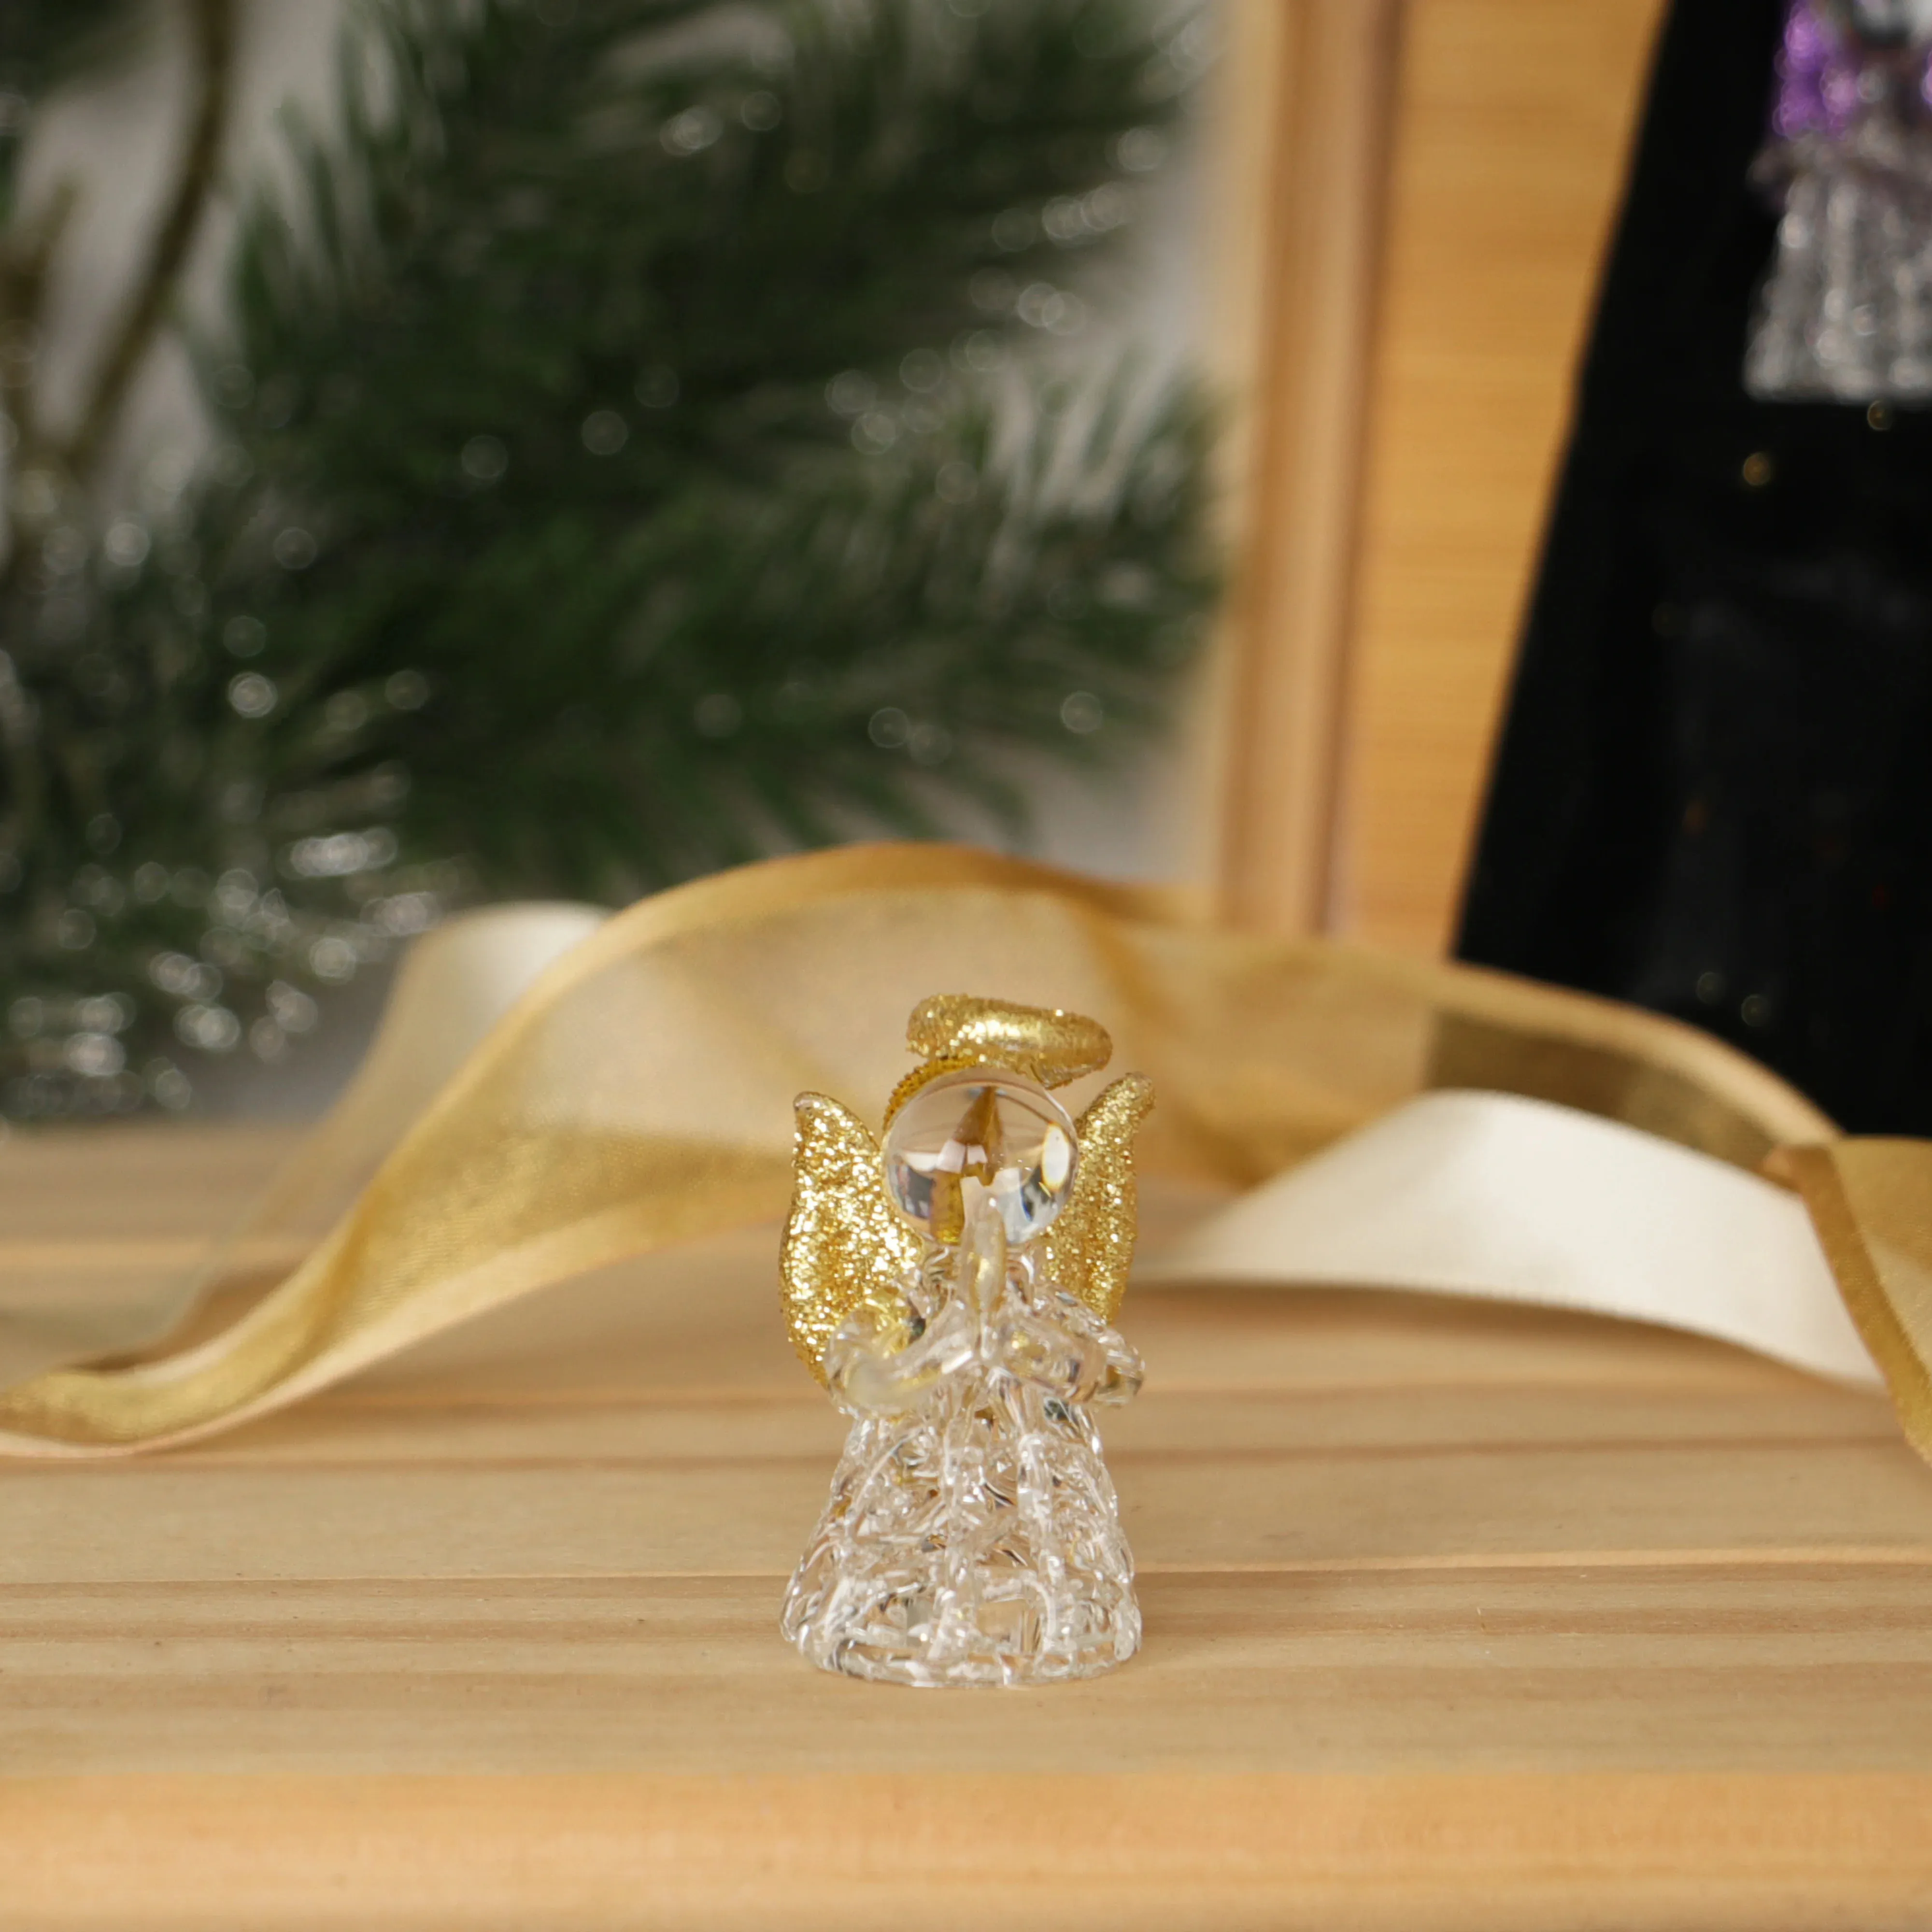 Enchanted Visions: Handcrafted Glass Angel Souvenir - A Unique Luxury Gift for Moments That Matter